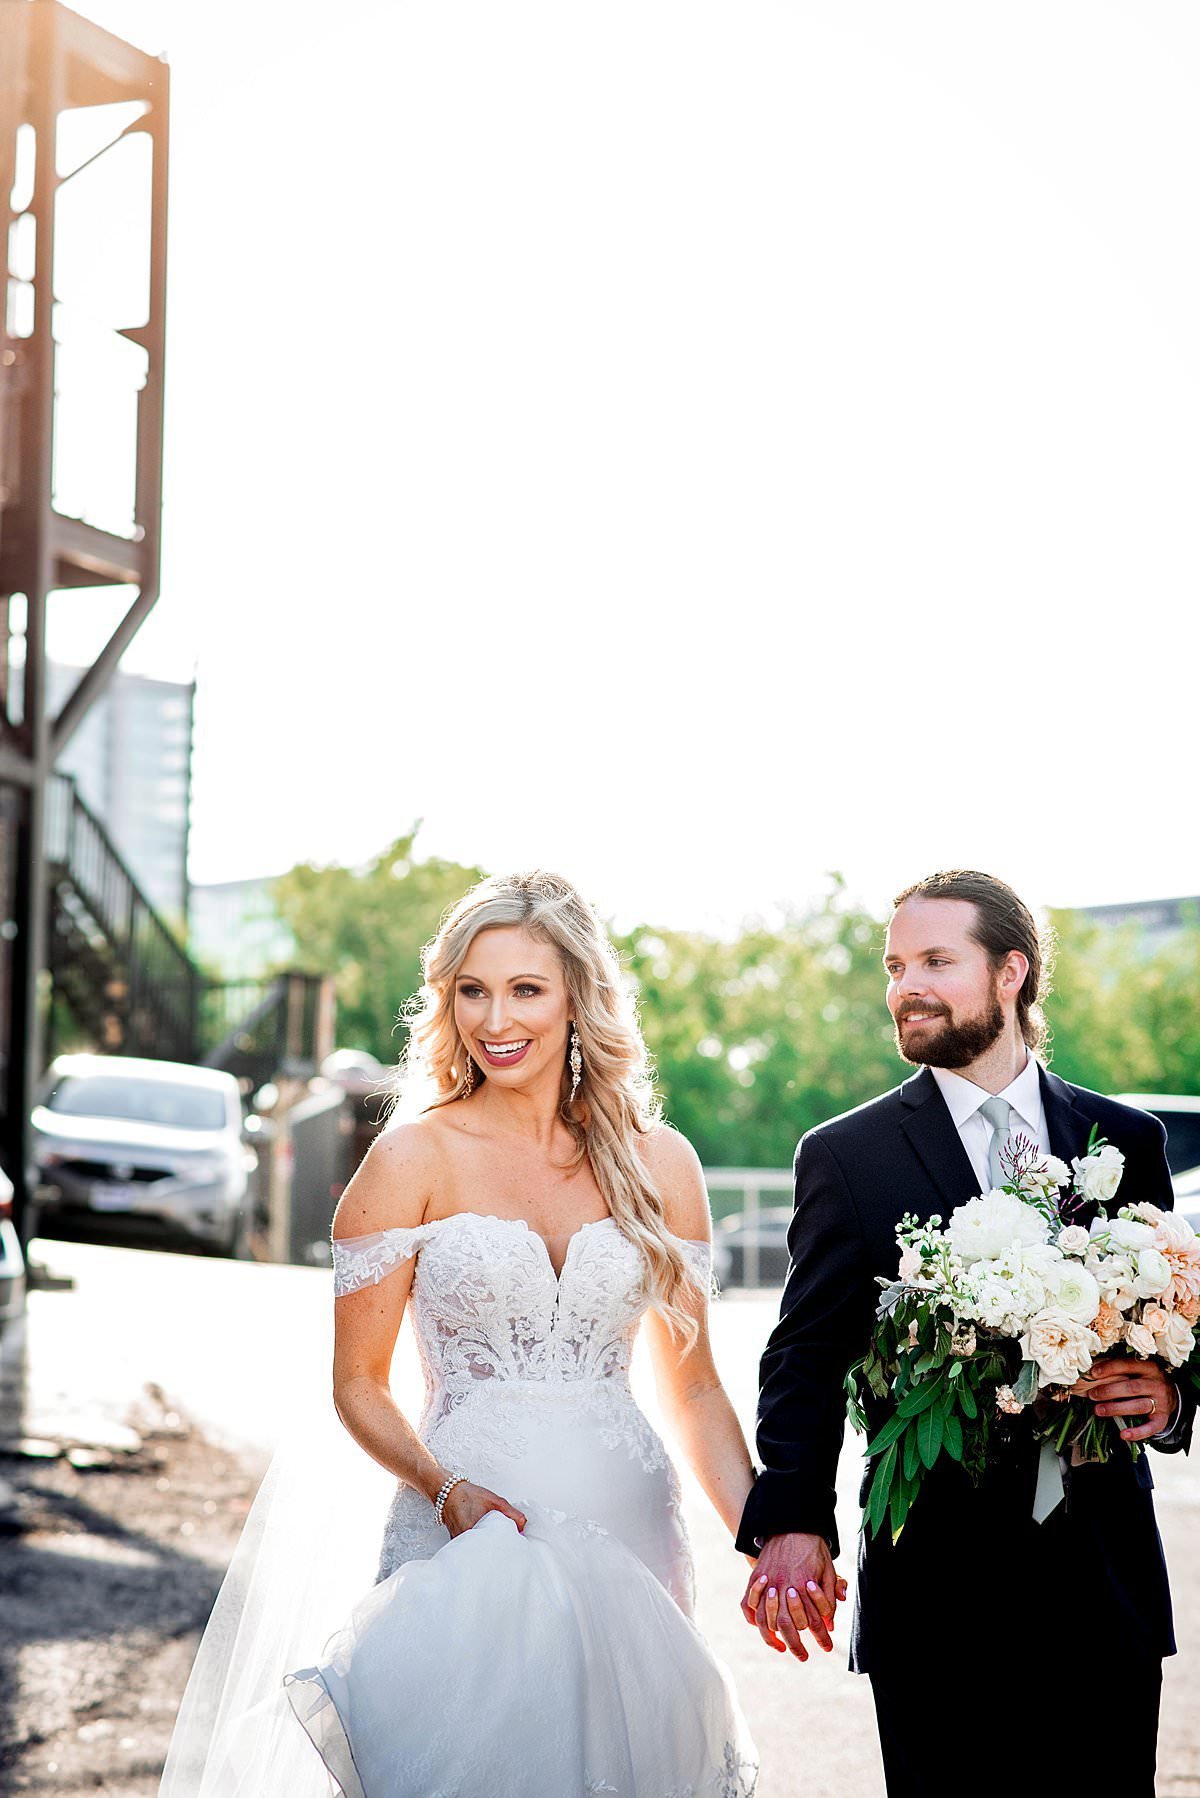 Bride and groom strolling through parking lot smiling candidly